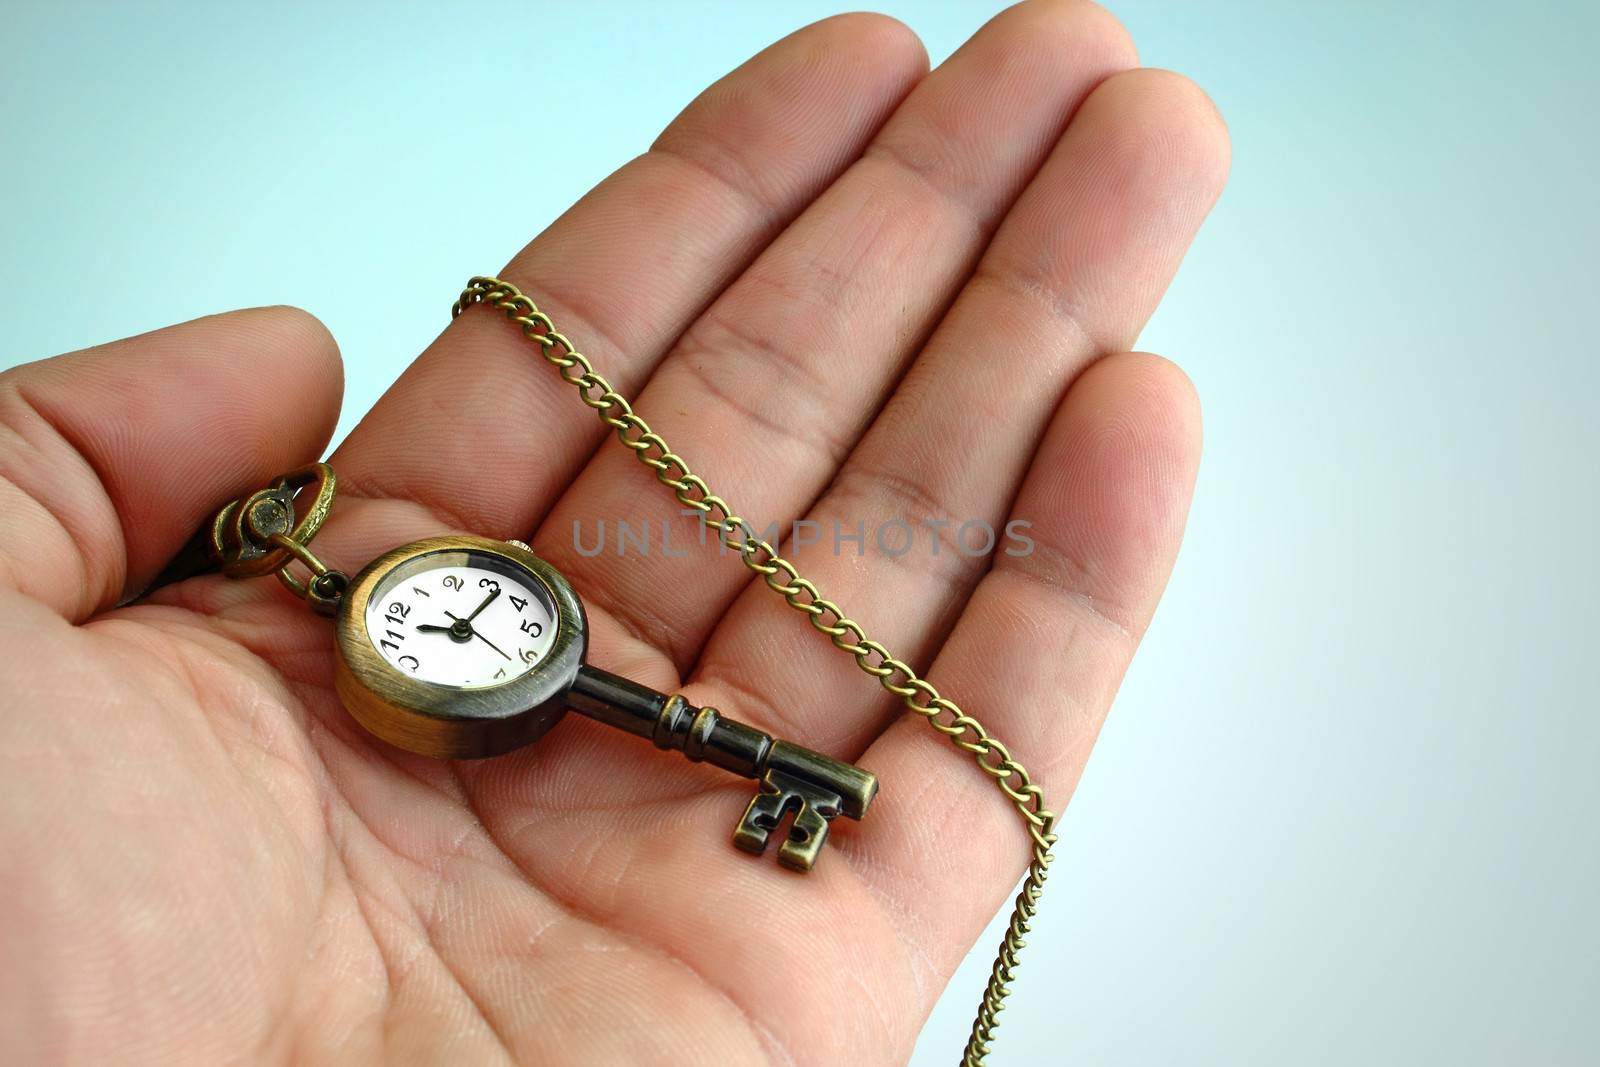 Hand holding a golden key with a built in clock